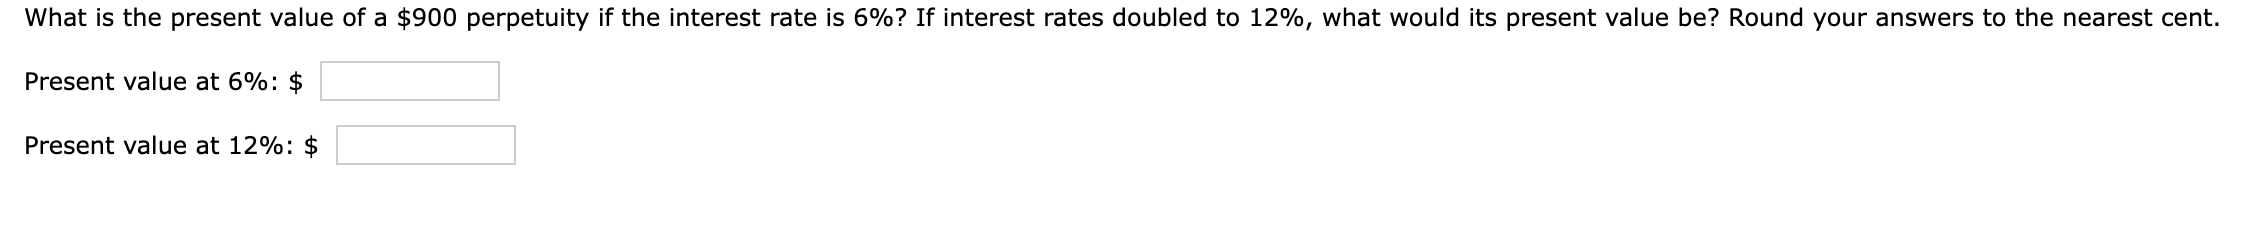 What is the present value of a $900 perpetuity if the interest rate is 6%? If interest rates doubled to 12%,